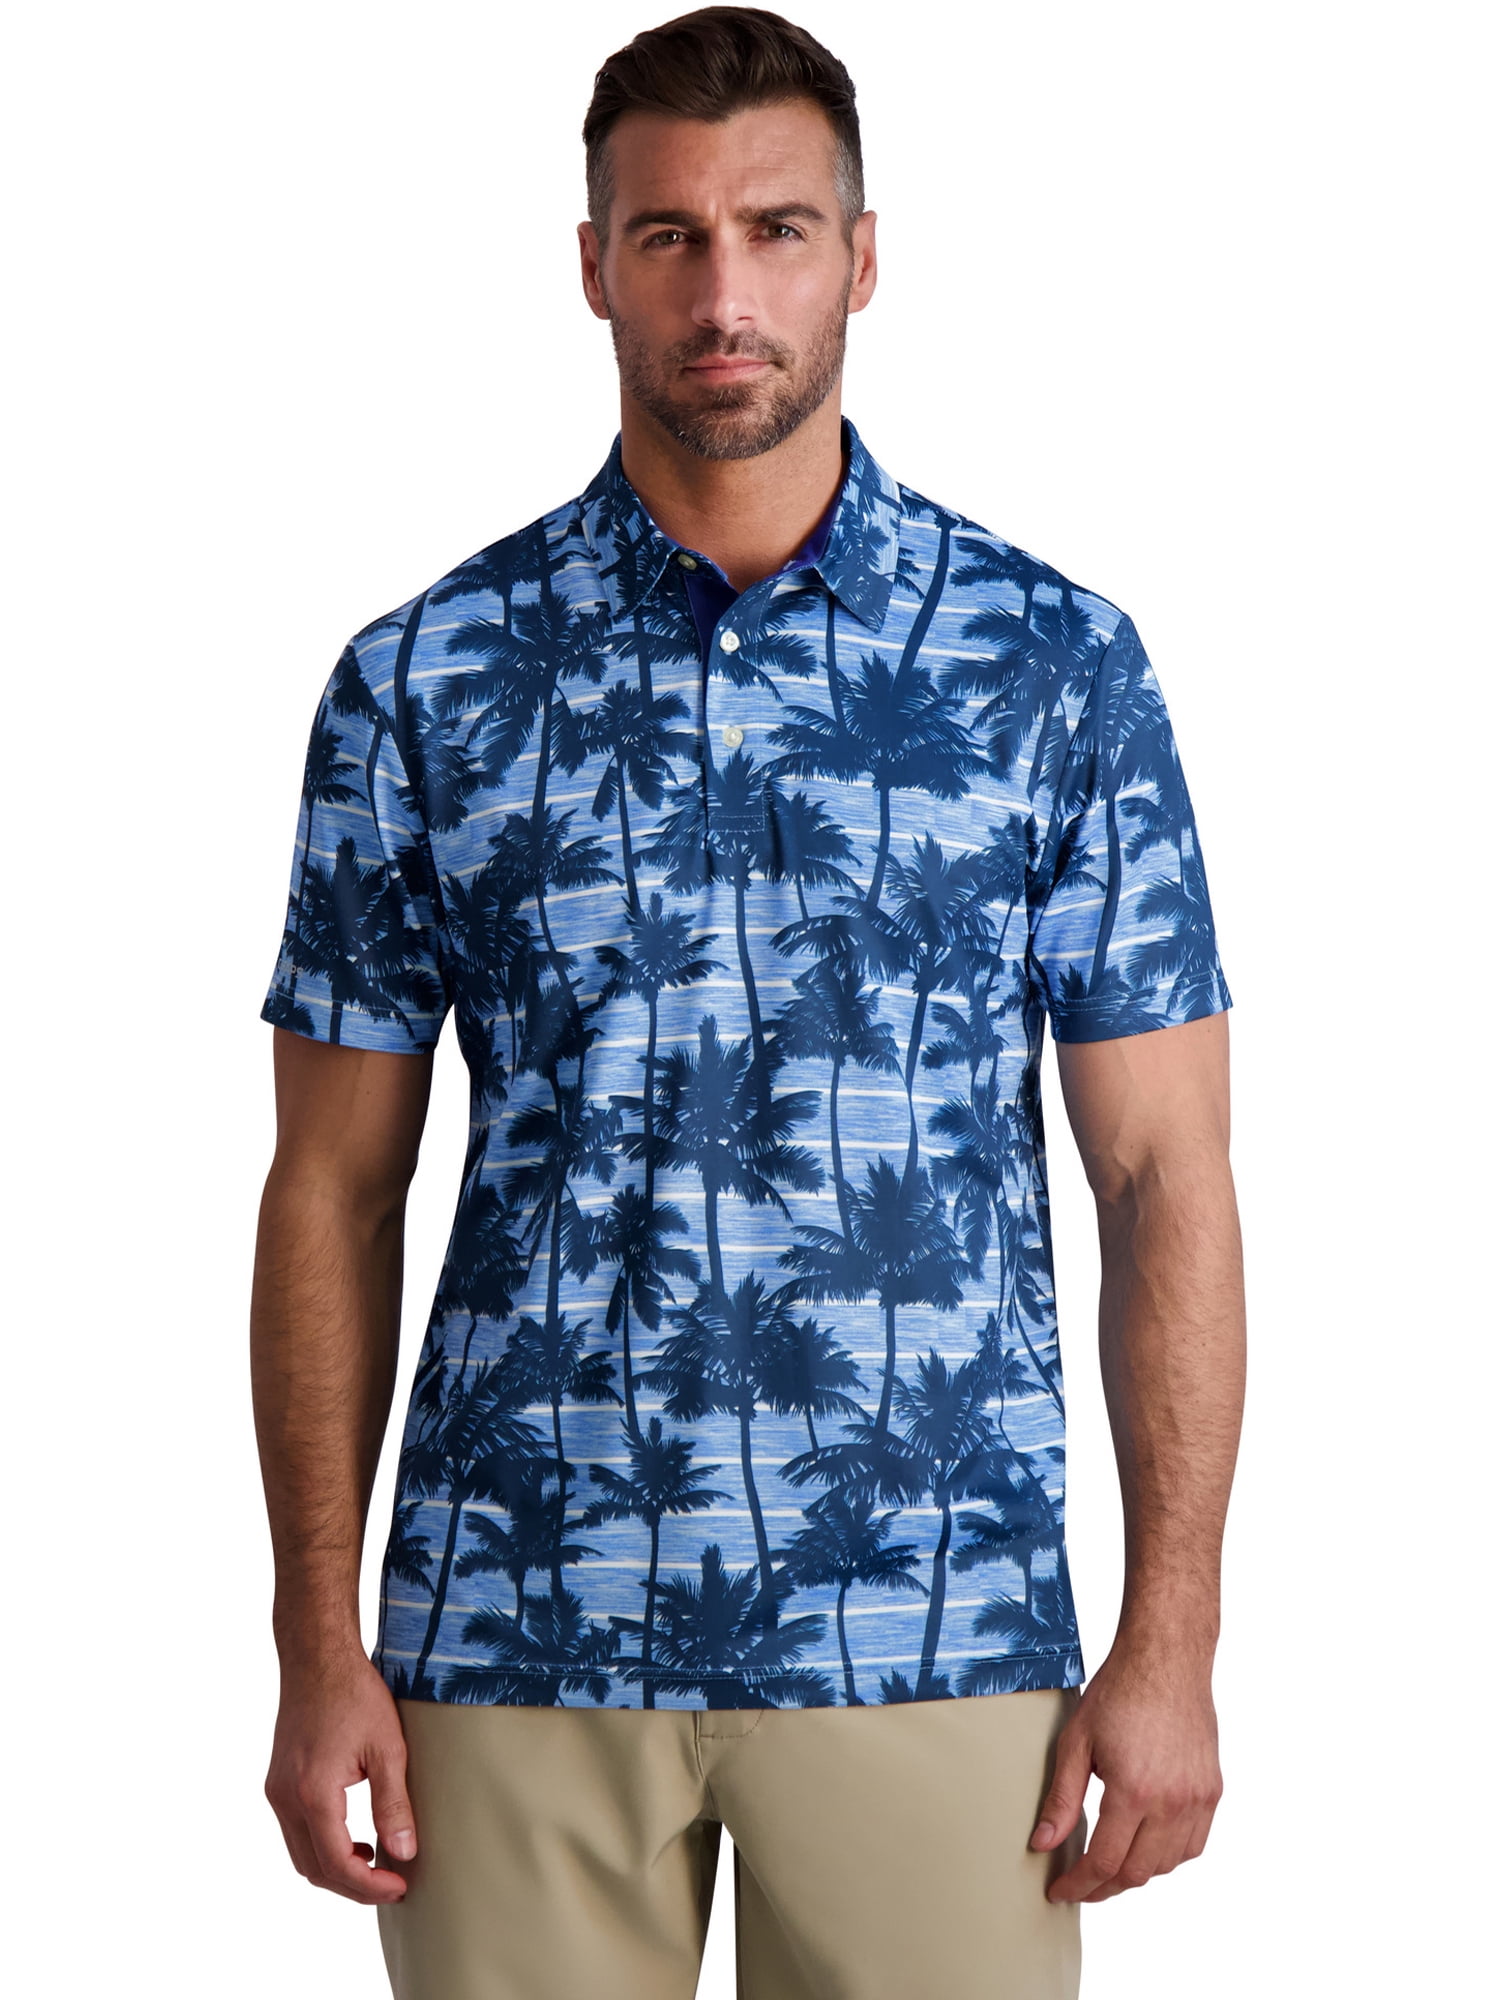 Chaps Men's Printed Golf Polo - Sizes S up to 3XL - Walmart.com